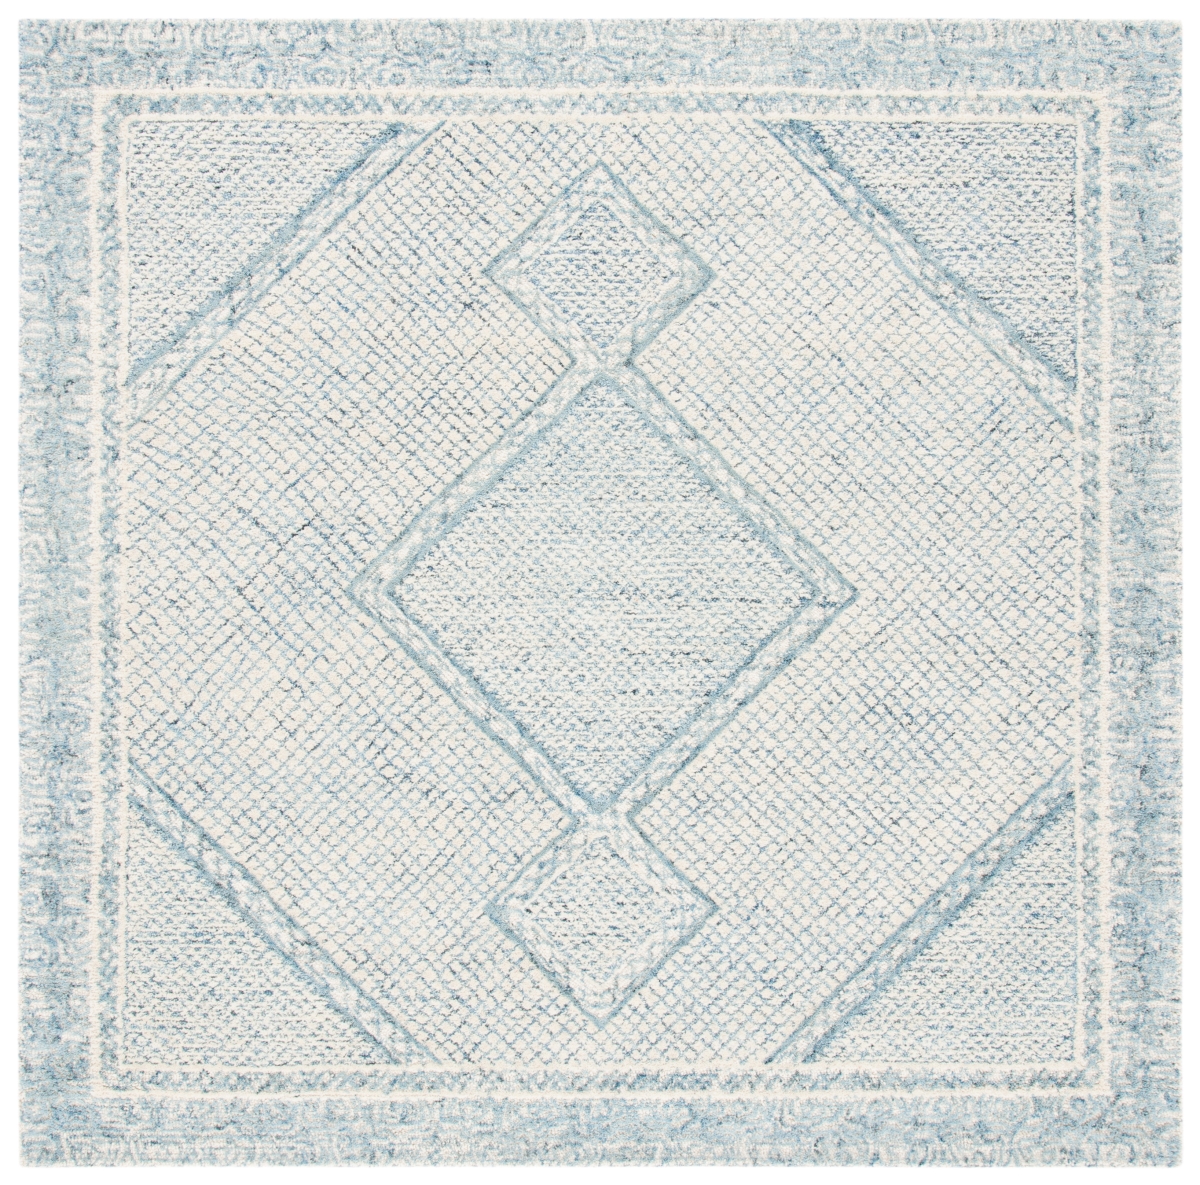 Abt345m-6sq 6 X 6 Ft. Abstract Bohemian Square Rug, Ivory & Blue